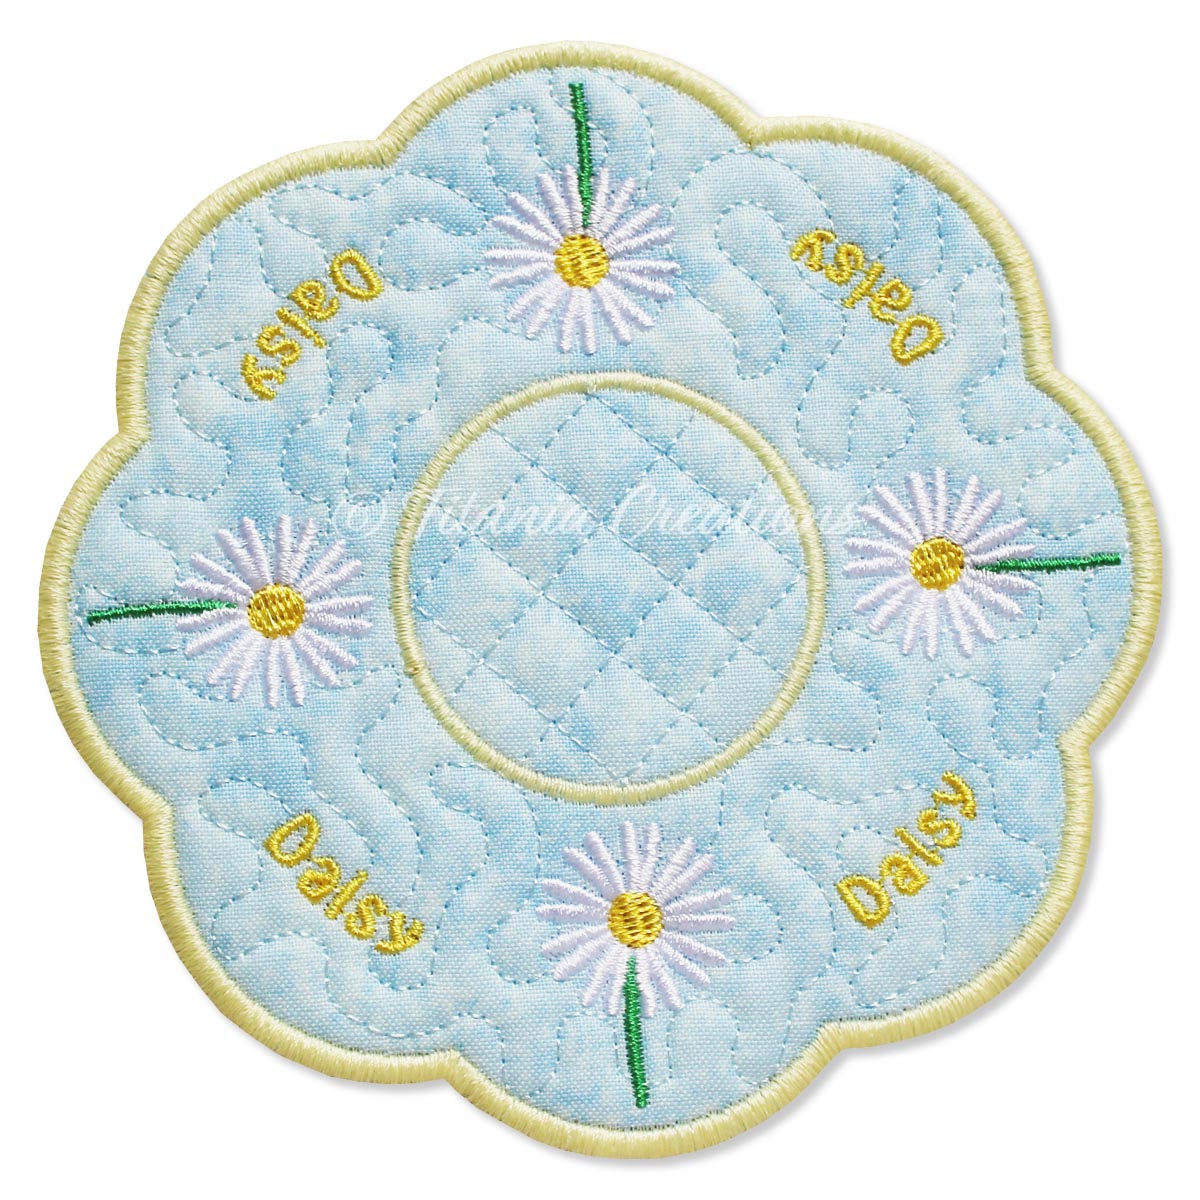 ITH Daisy Flower for April Candle Mat 5x5 6x6 7x7 8x8